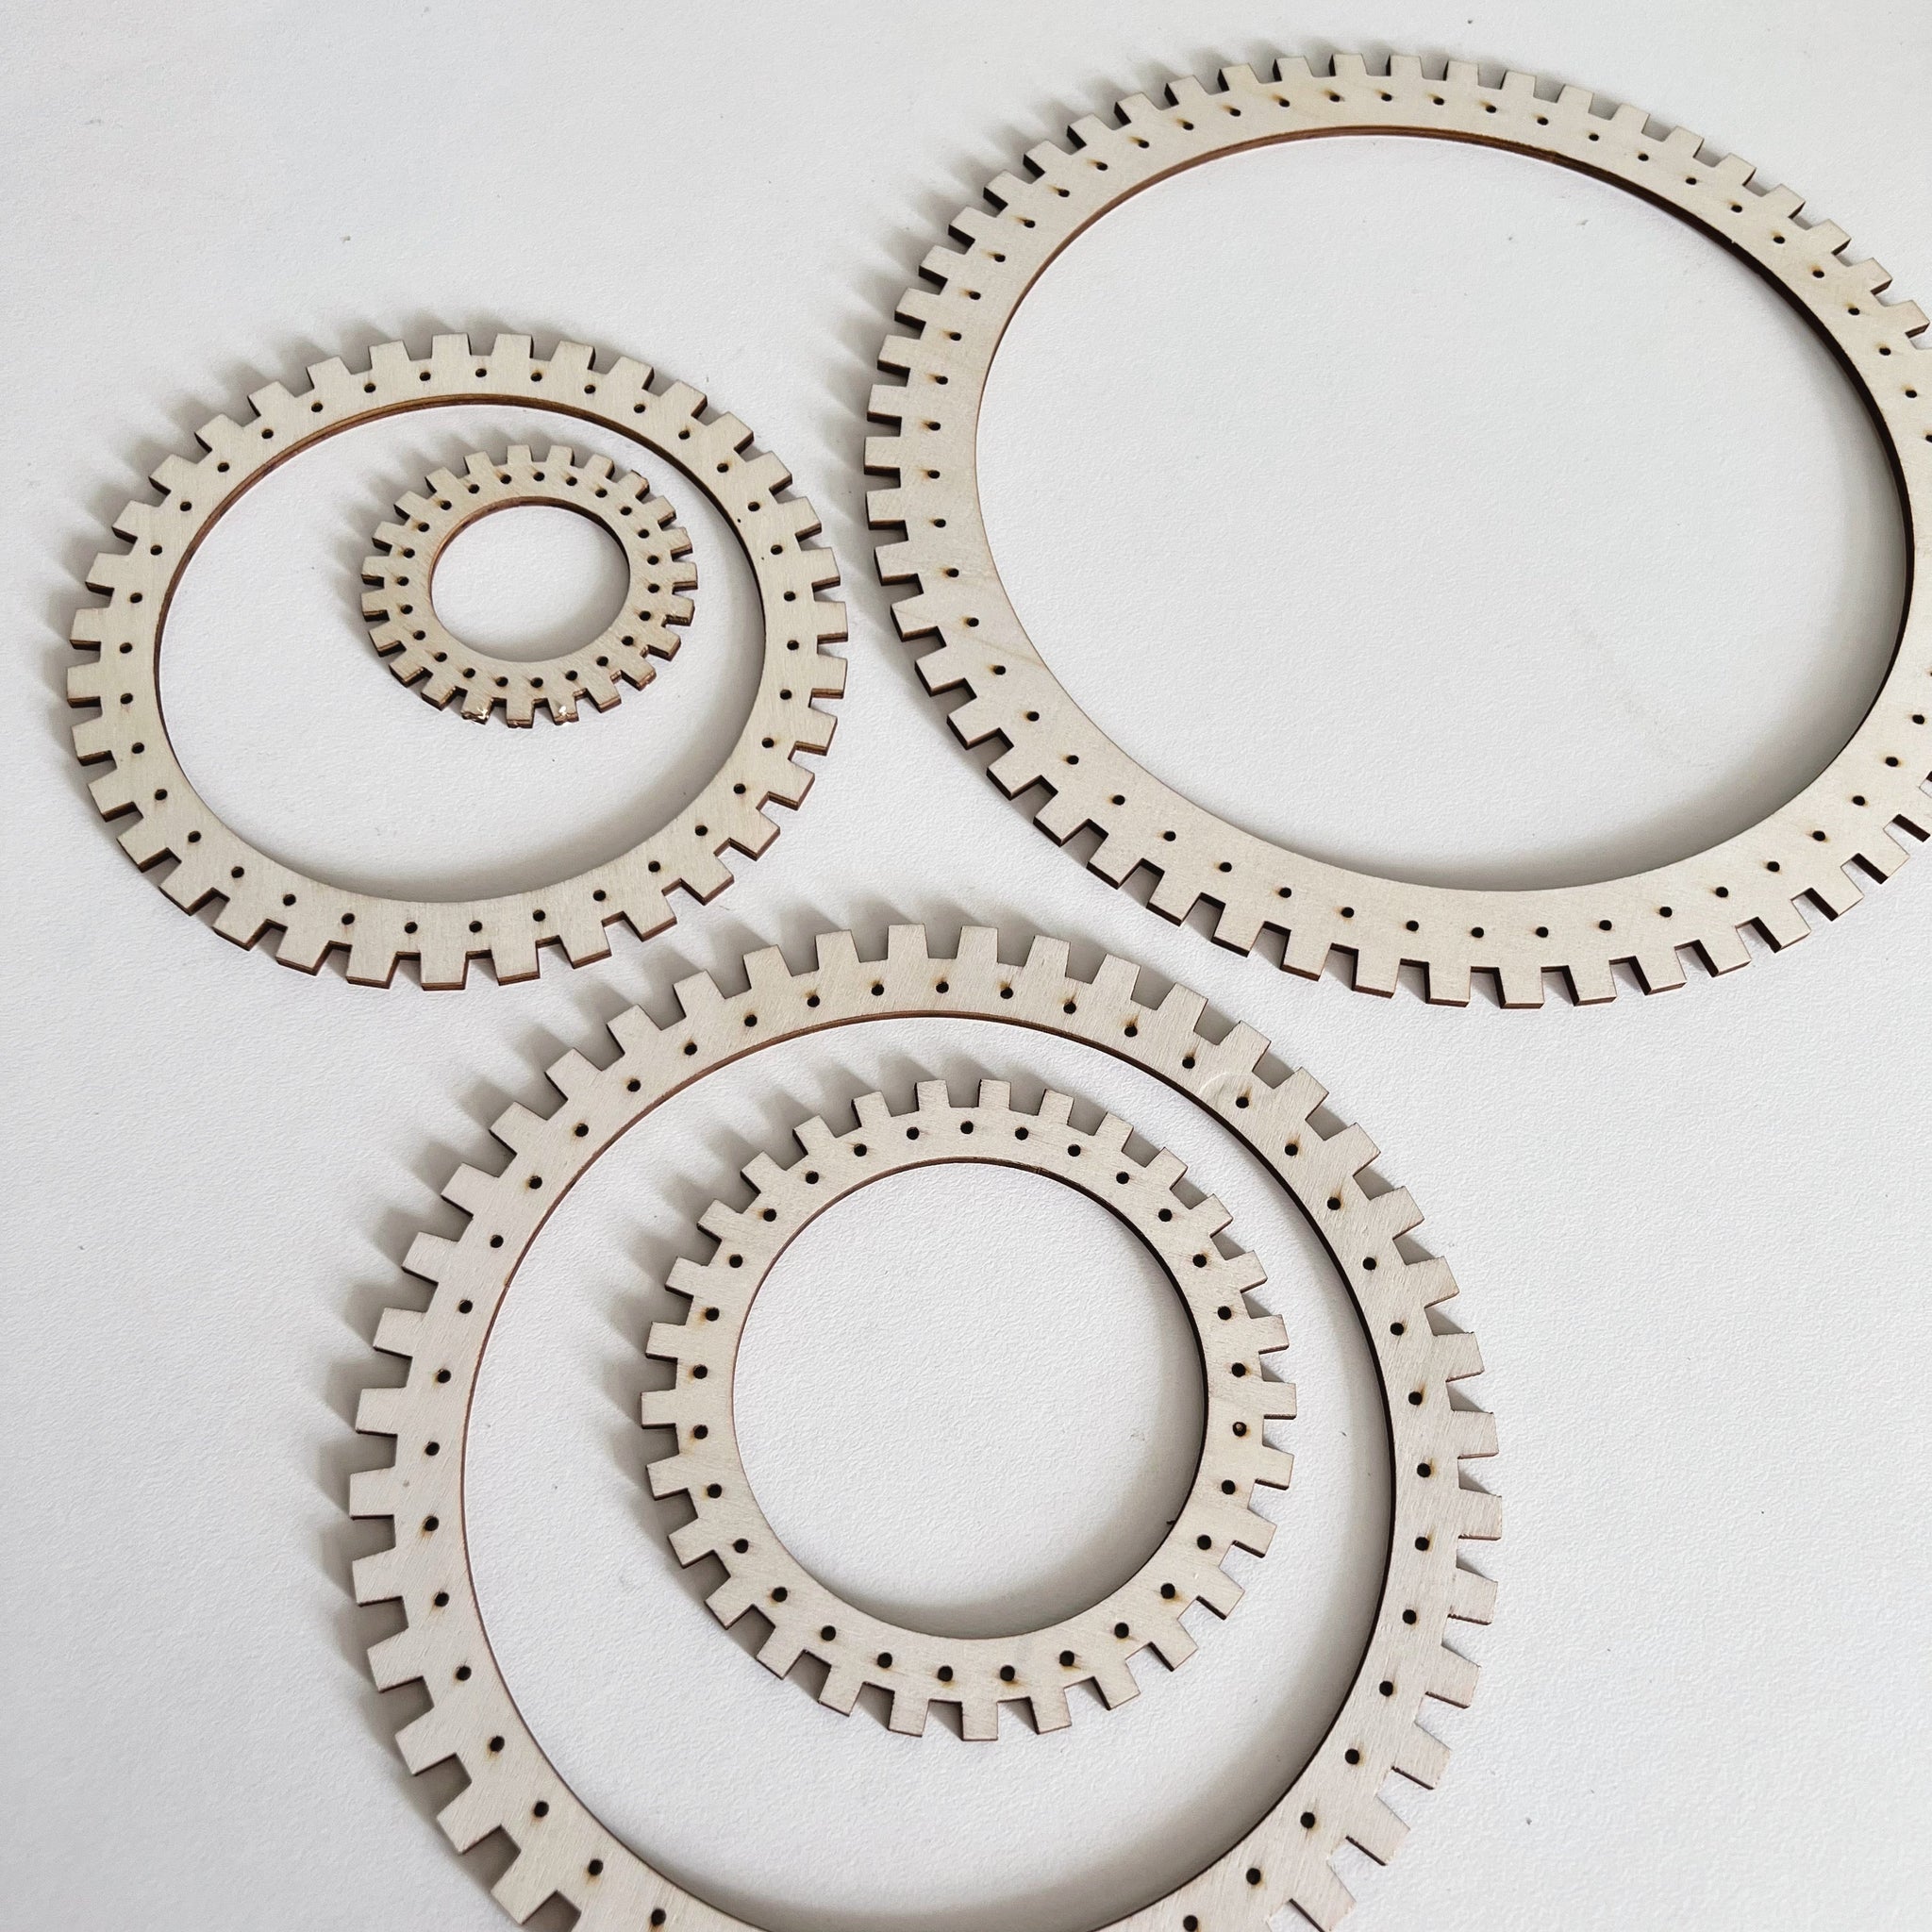 Flower Loom: Round Loom Tool Shapes for Making Circular Flowers